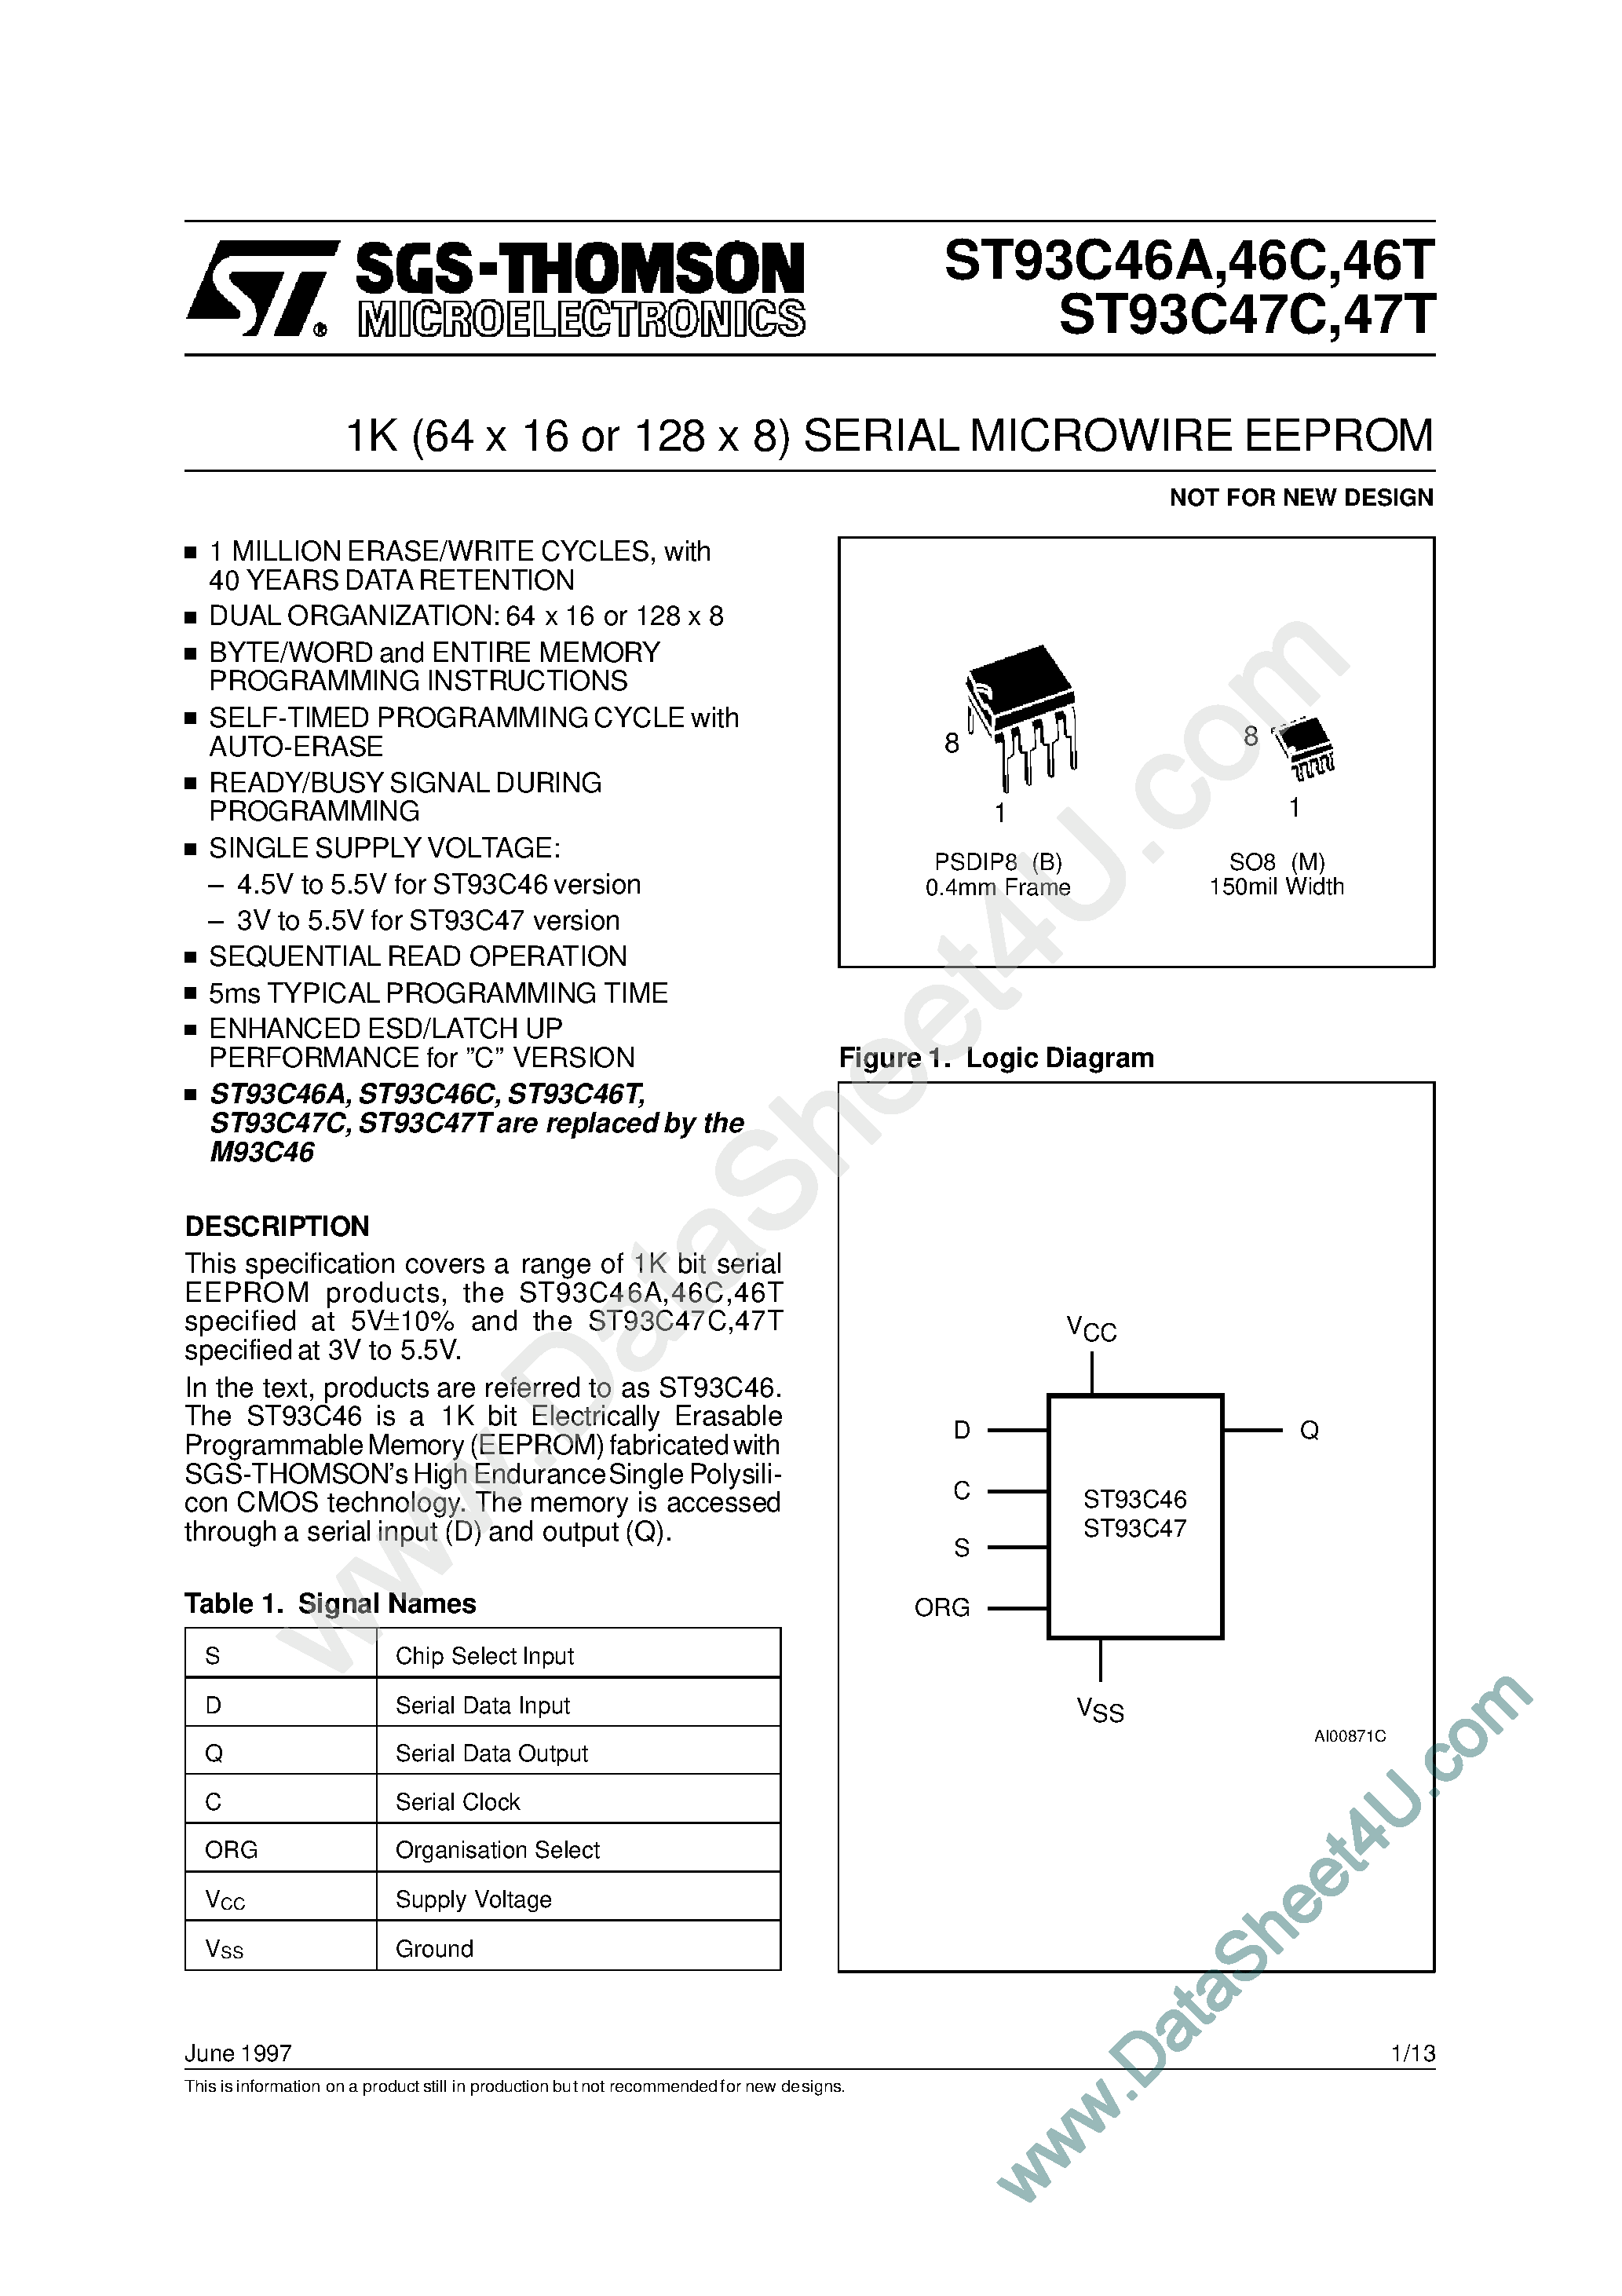 Datasheet ST93C46A - 1K 64 x 16 or 128 x 8 SERIAL MICROWIRE EEPROM page 1